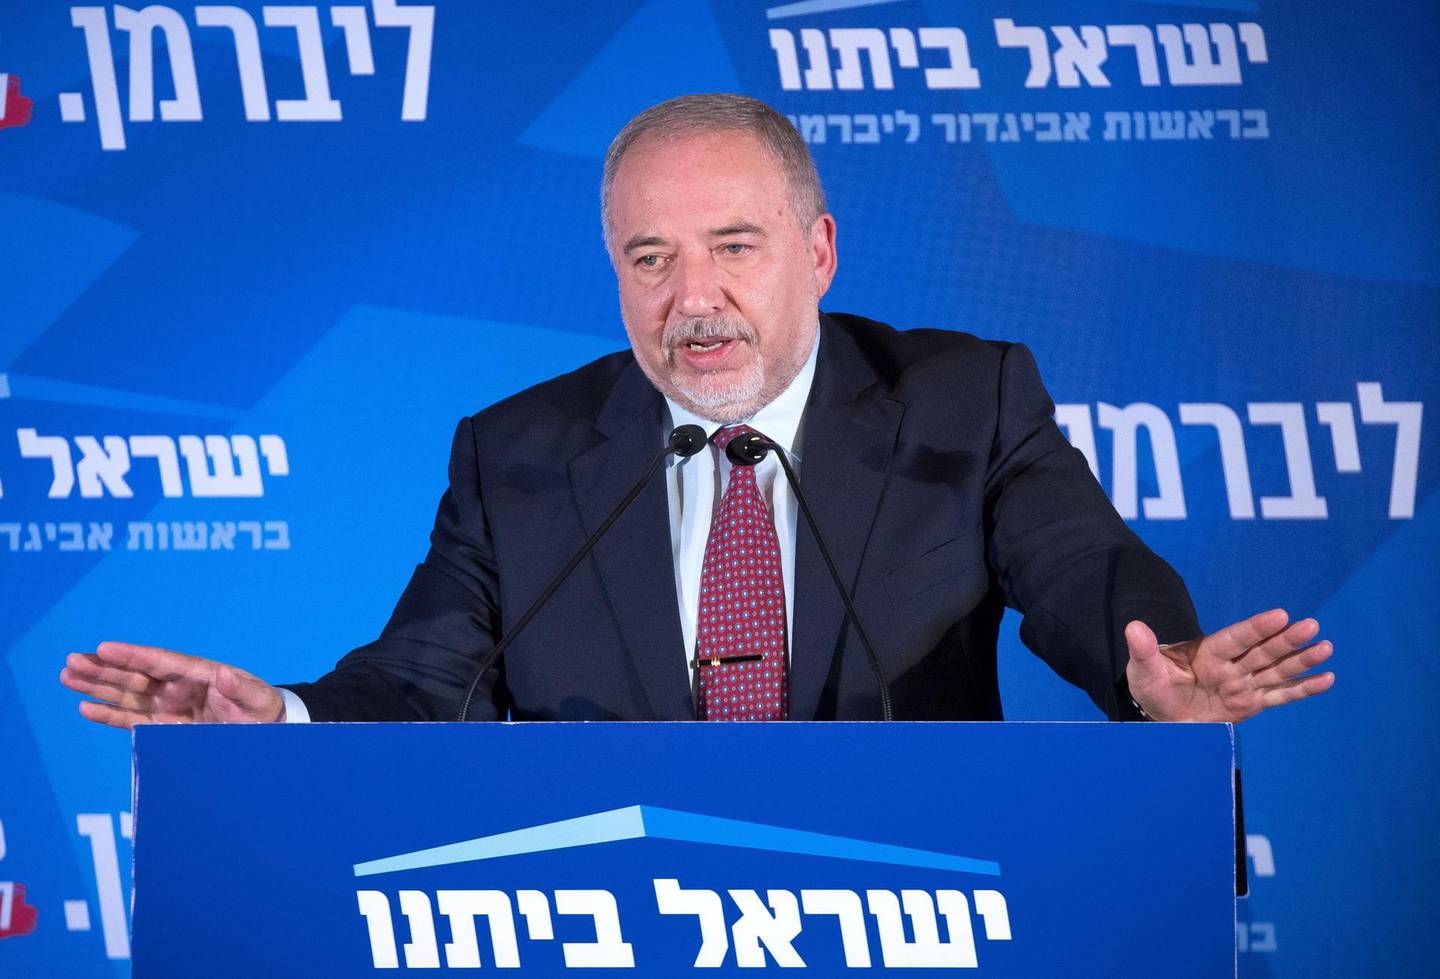 epa07849829 Avigdor Lieberman, leader of the Yisrael Beitenu party, speaks after early exit polls in the general election, during a rally with supporters in Jerusalem, Israel, 17 September 2019. Early polls gave Israeli Prime Minister Benjamin Netanyahu's Likud party and Benny Gantz's Blue and White party almost equal amount of Knesset seats in the Israeli general elections.  EPA/YONATAN SINDEL